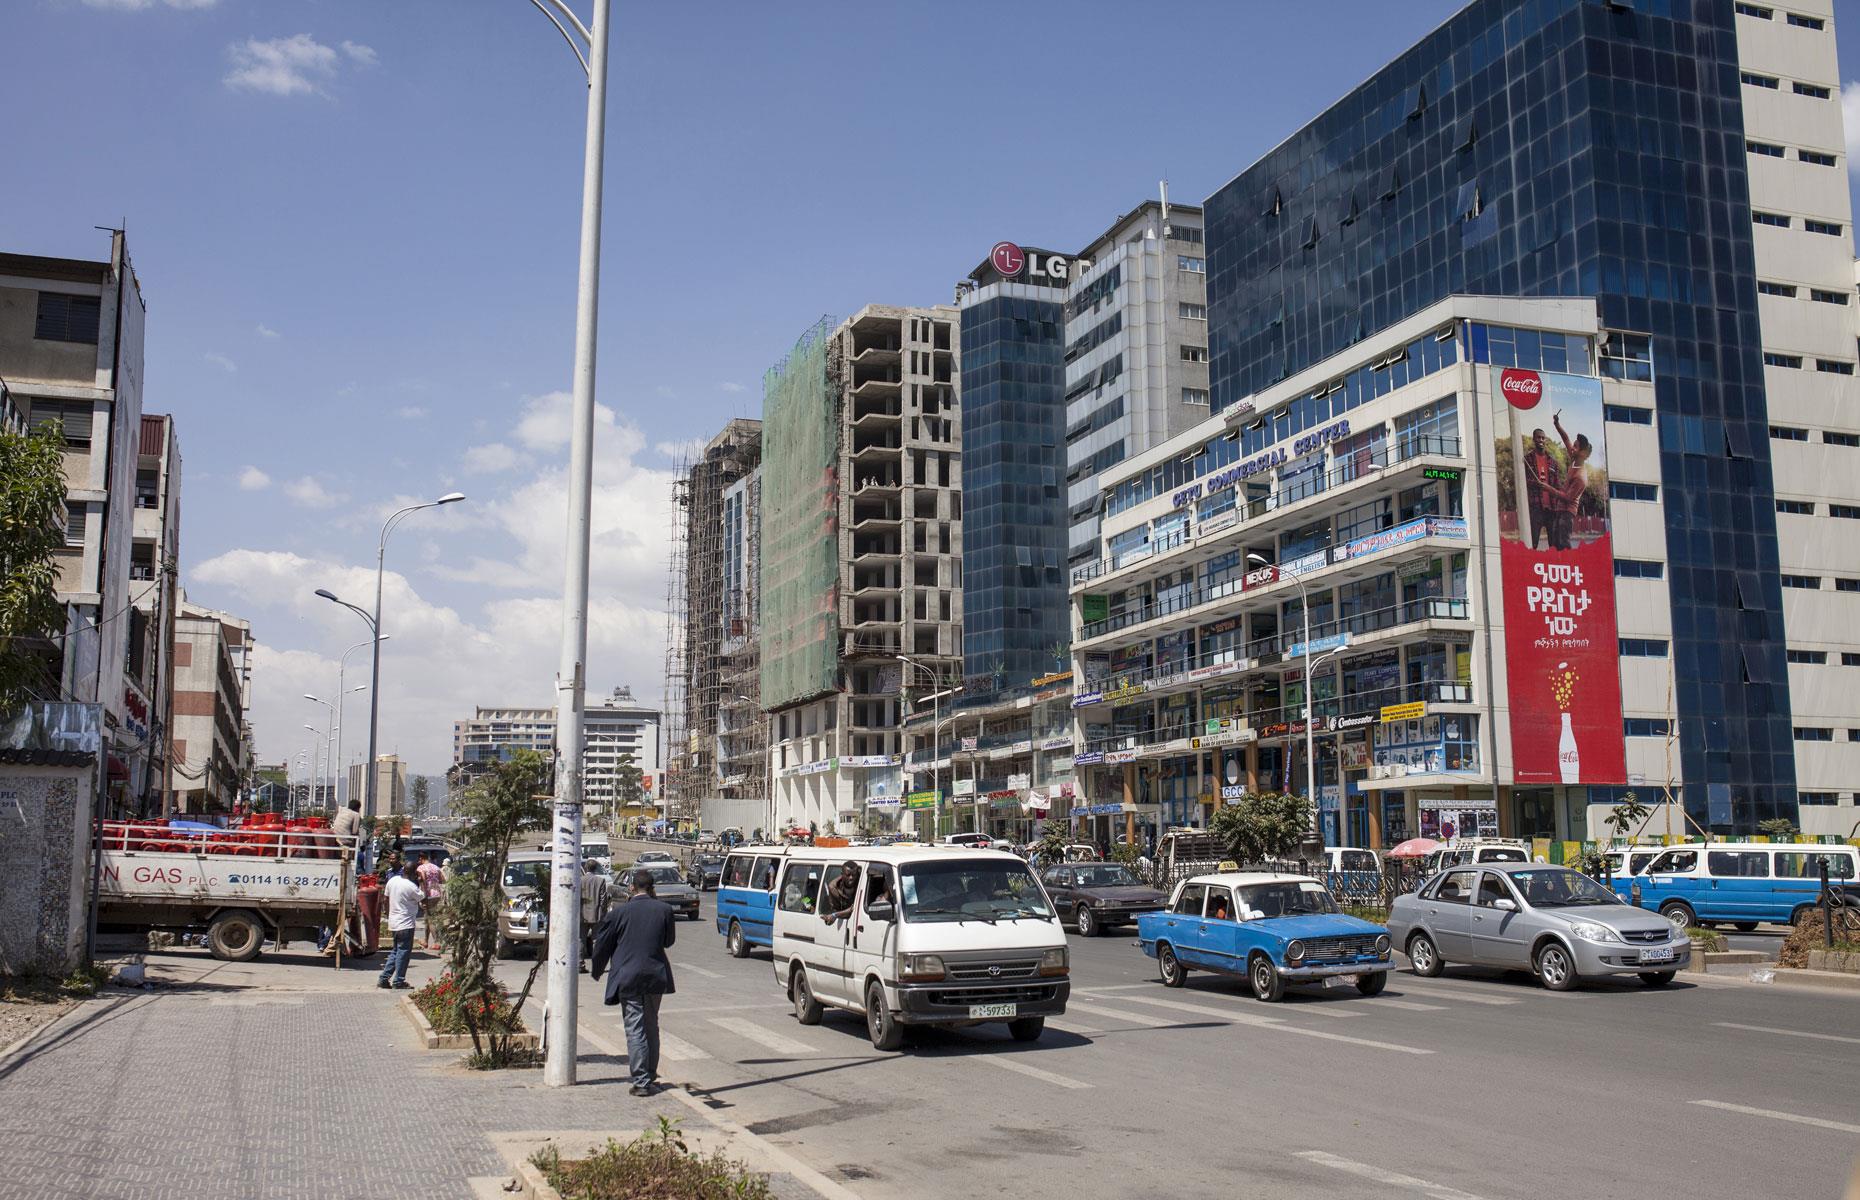 Ethiopia: 8% growth rate